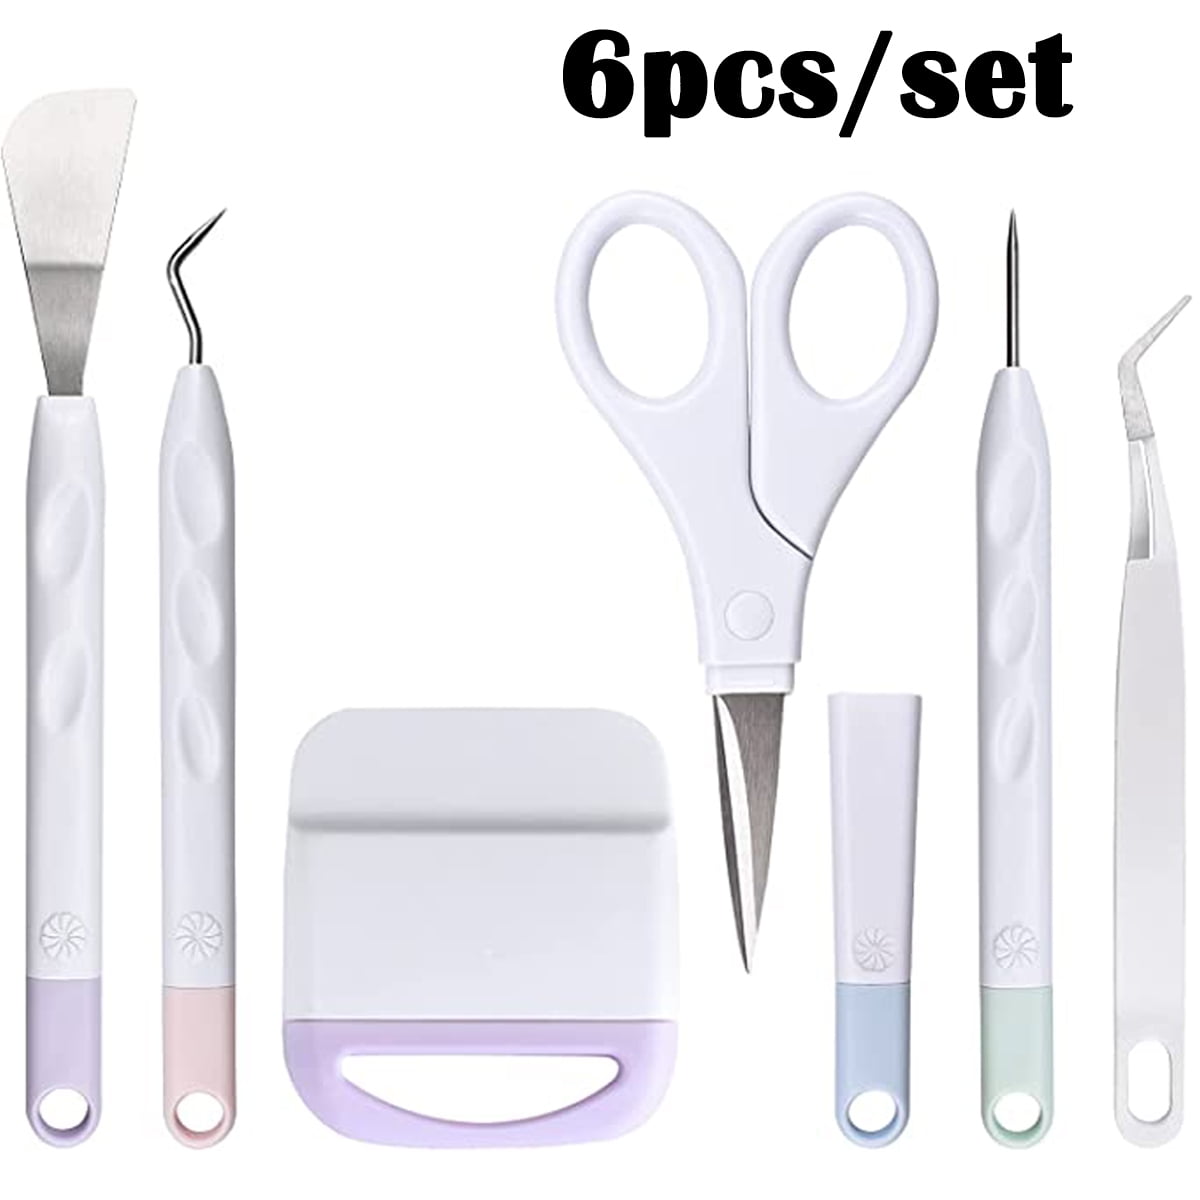 Qingy-6 Pieces Plotter Accessories, Debridding Tool Plotter for Base Tools Kit, Plotter Tool, Basic Accessories Weeding Tools, Vinyl Craft Tool Set